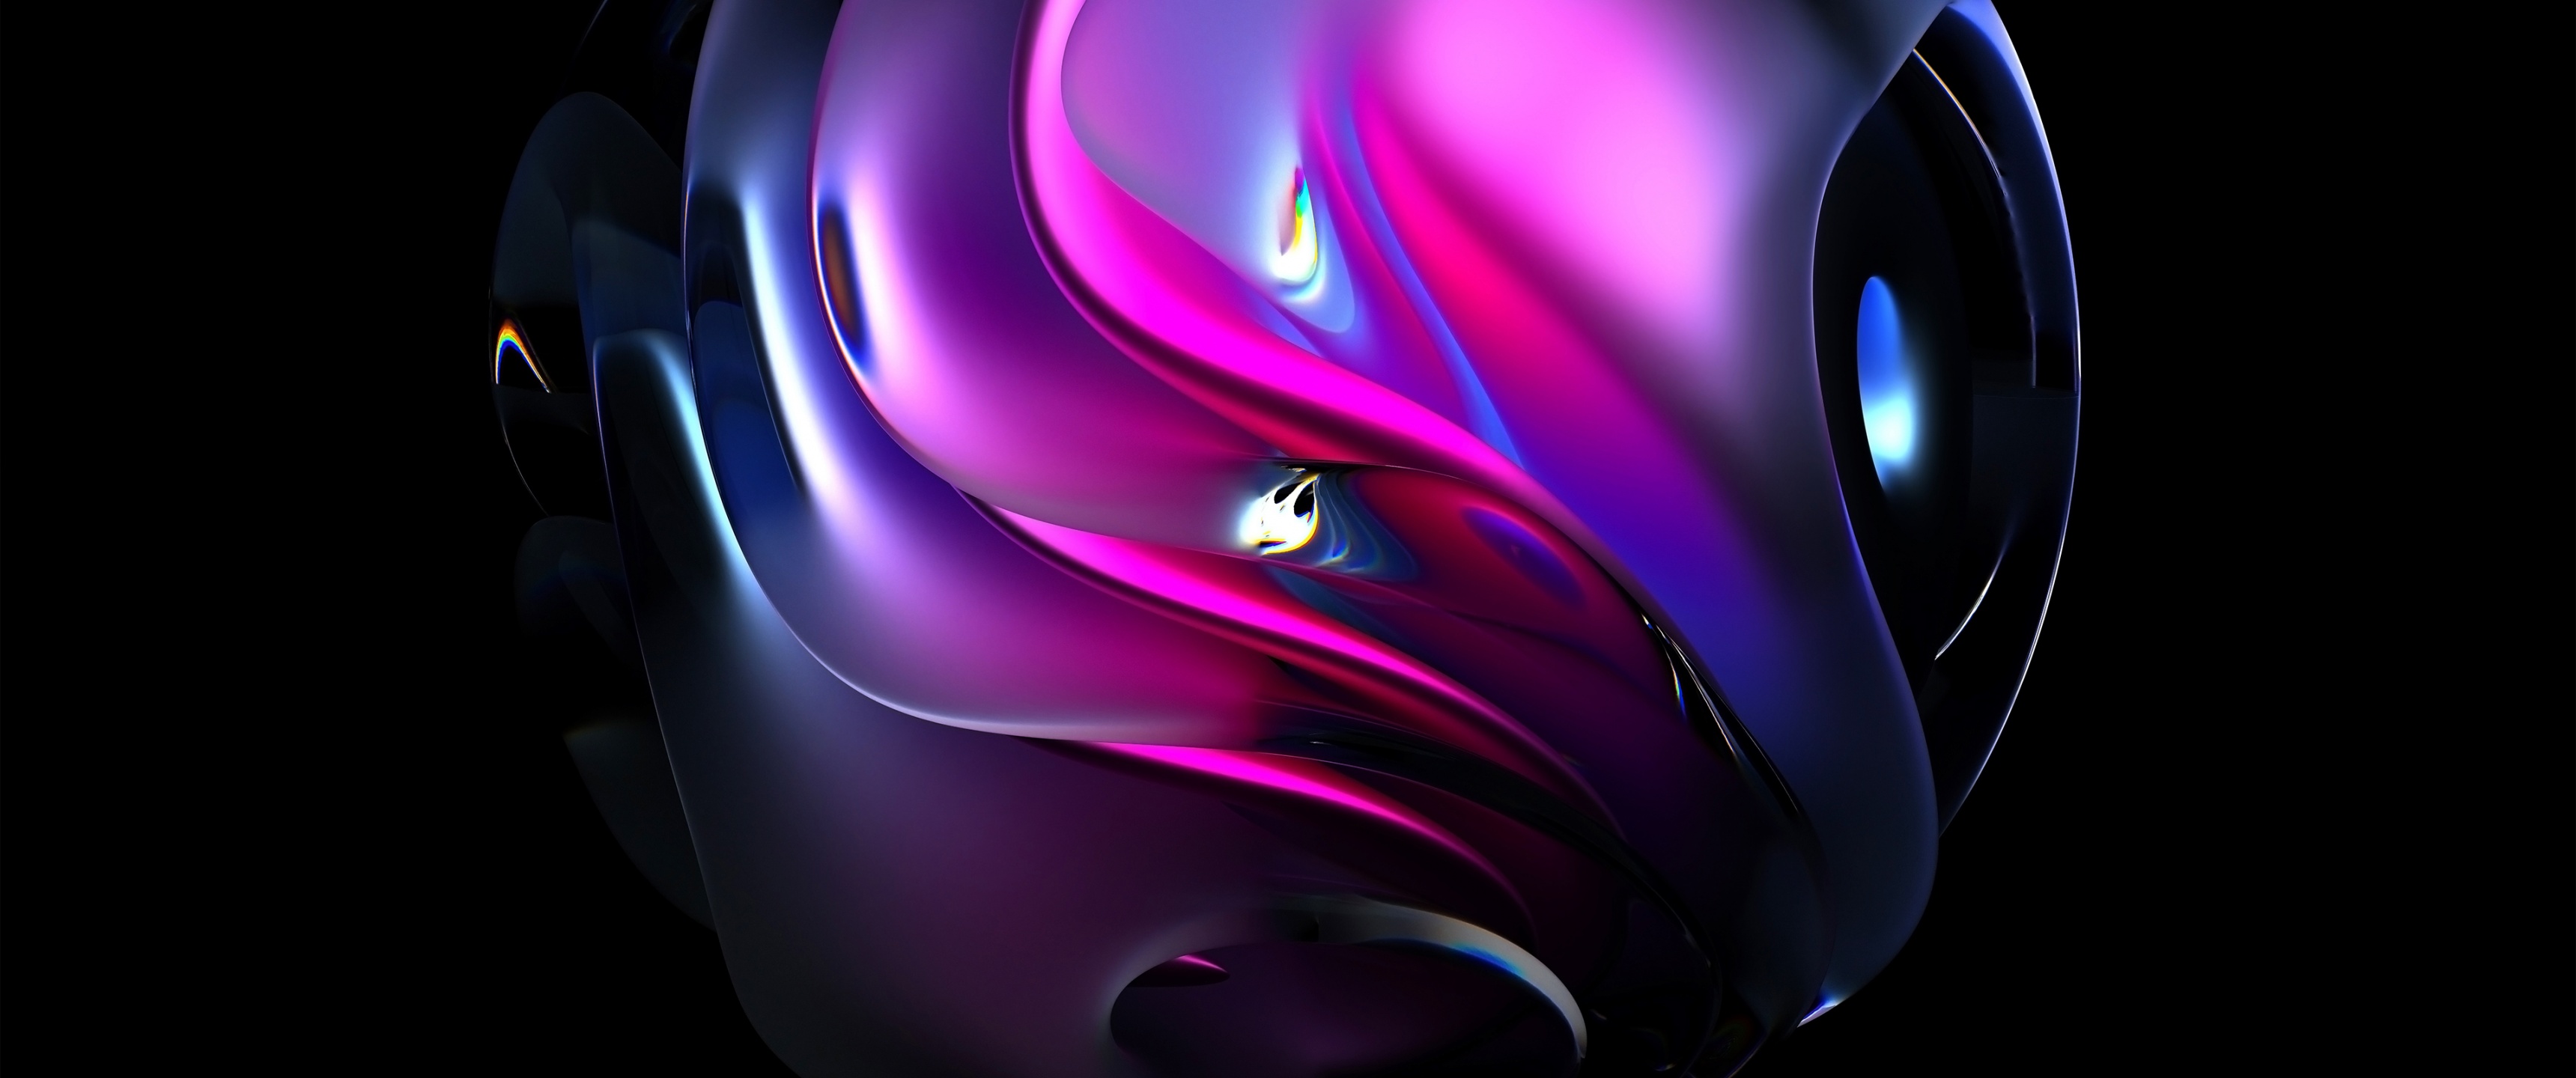 Abstract background Wallpaper 4K, Black background, Abstract, #8657